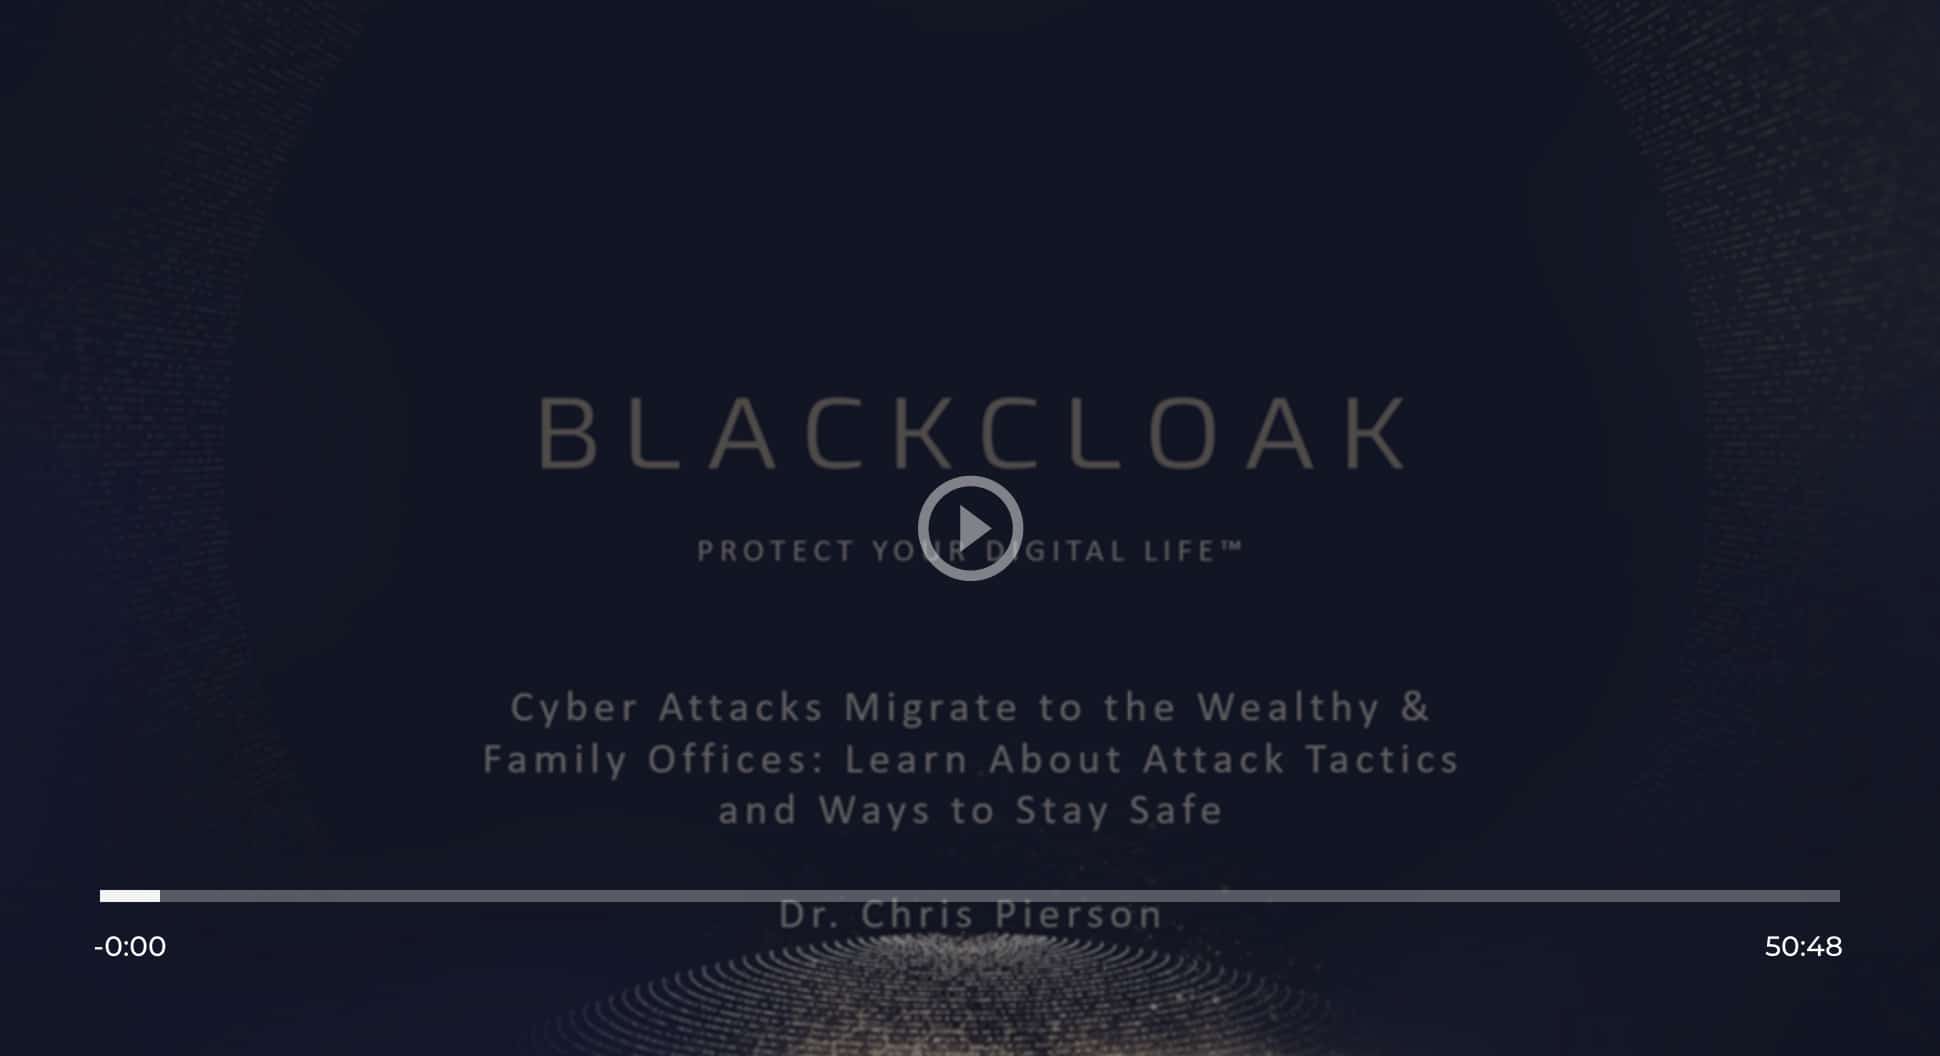 BlackCloak webinar on how cyber attacks migrate to the wealthy and family offices